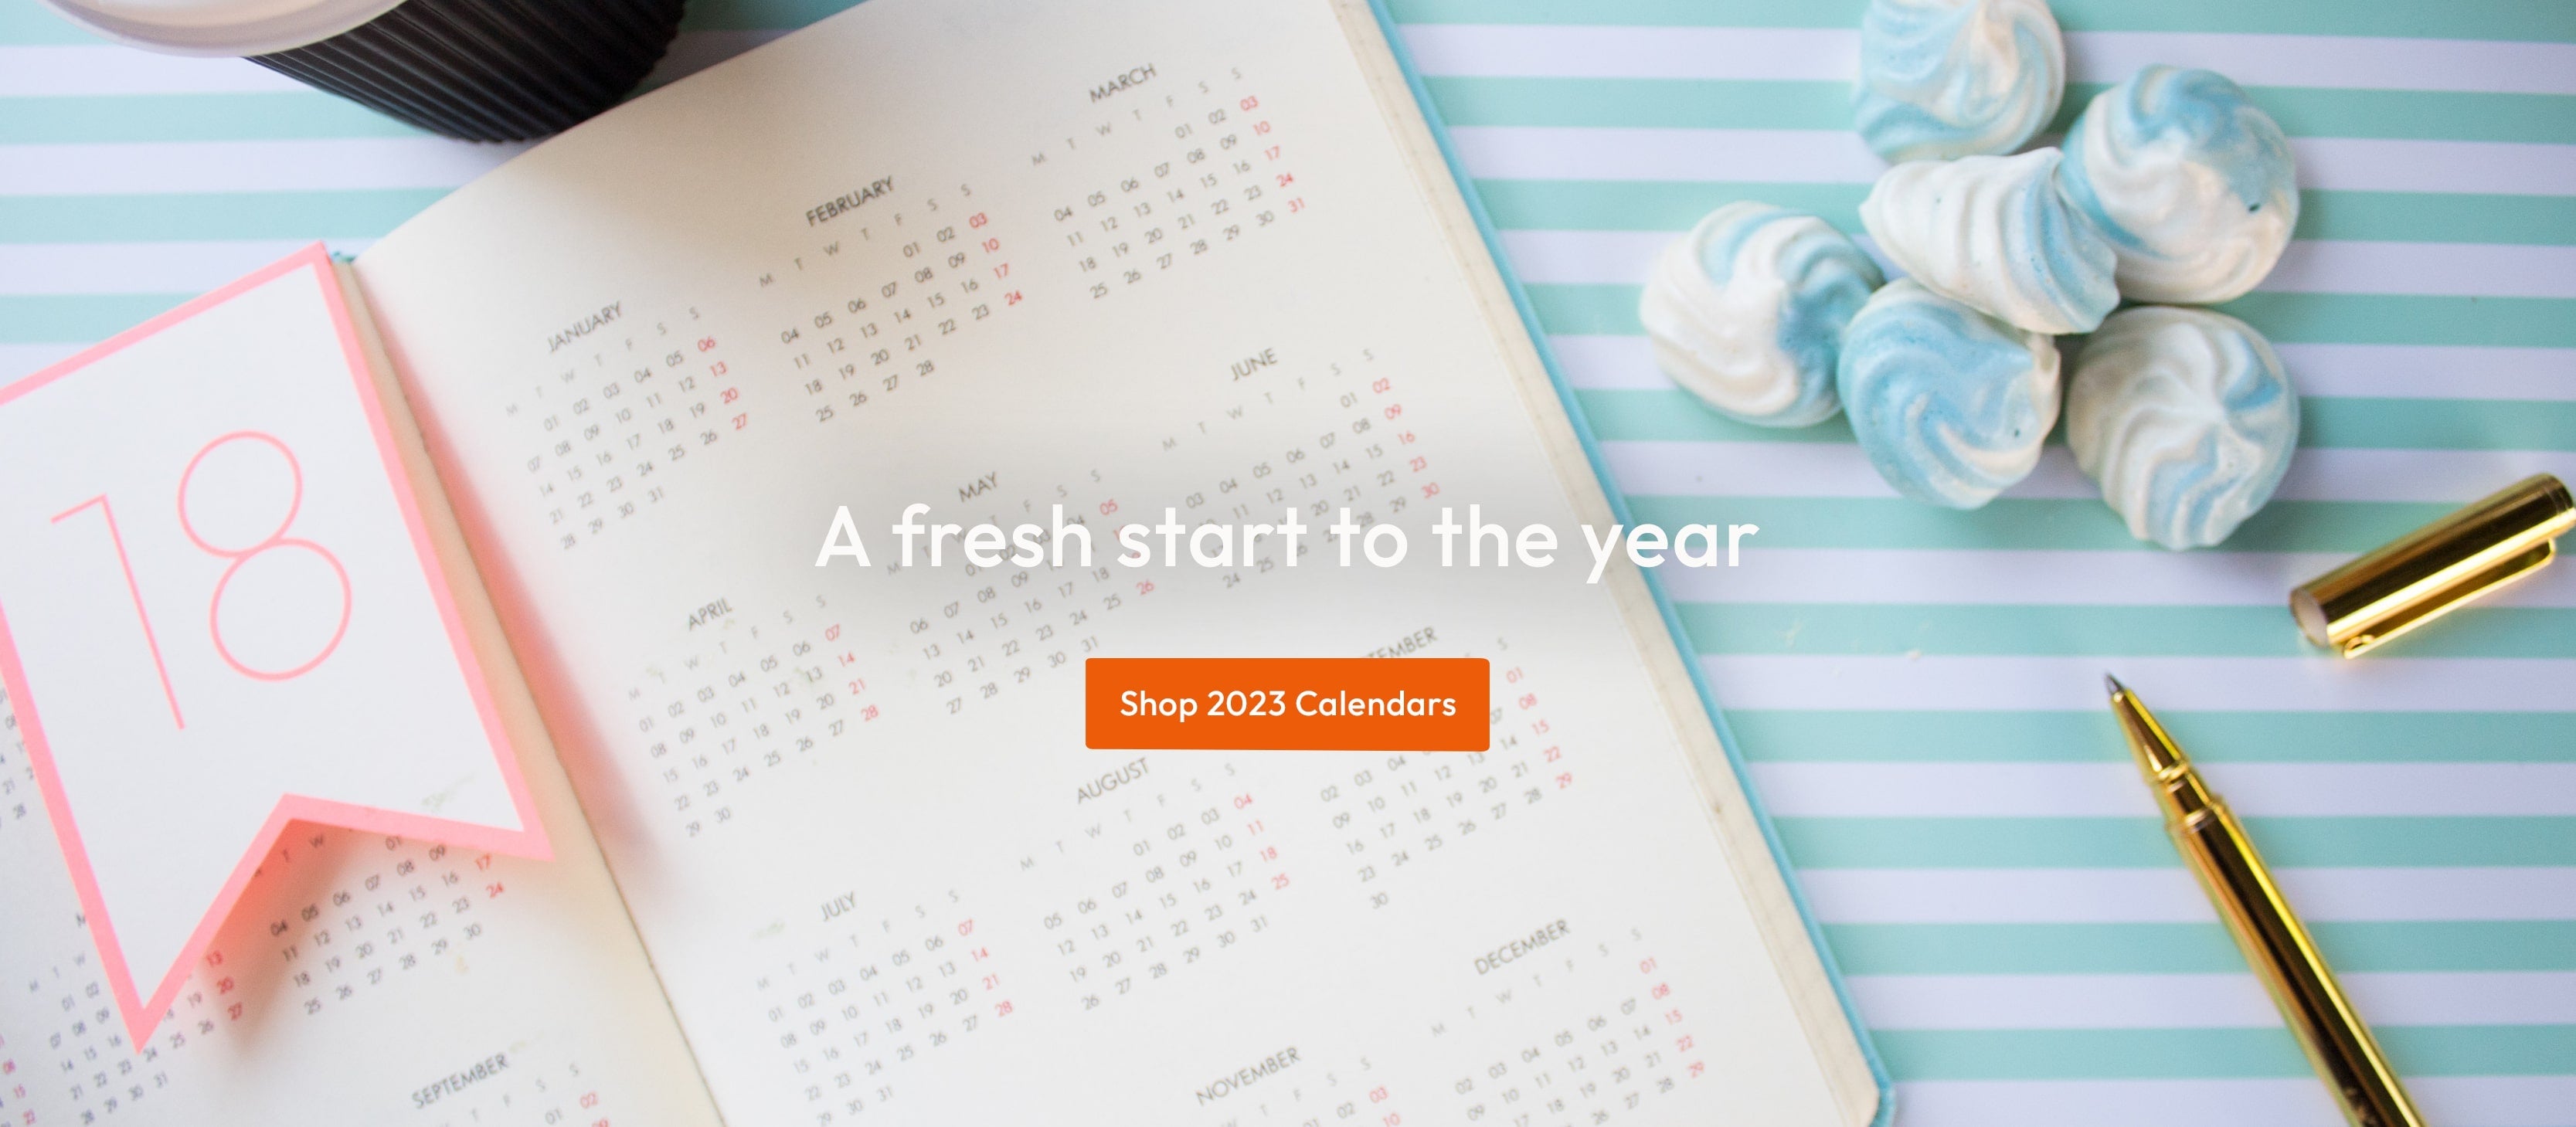 A fresh start to the new year - Shop a great selection of 2023 calendars at Calendar Club